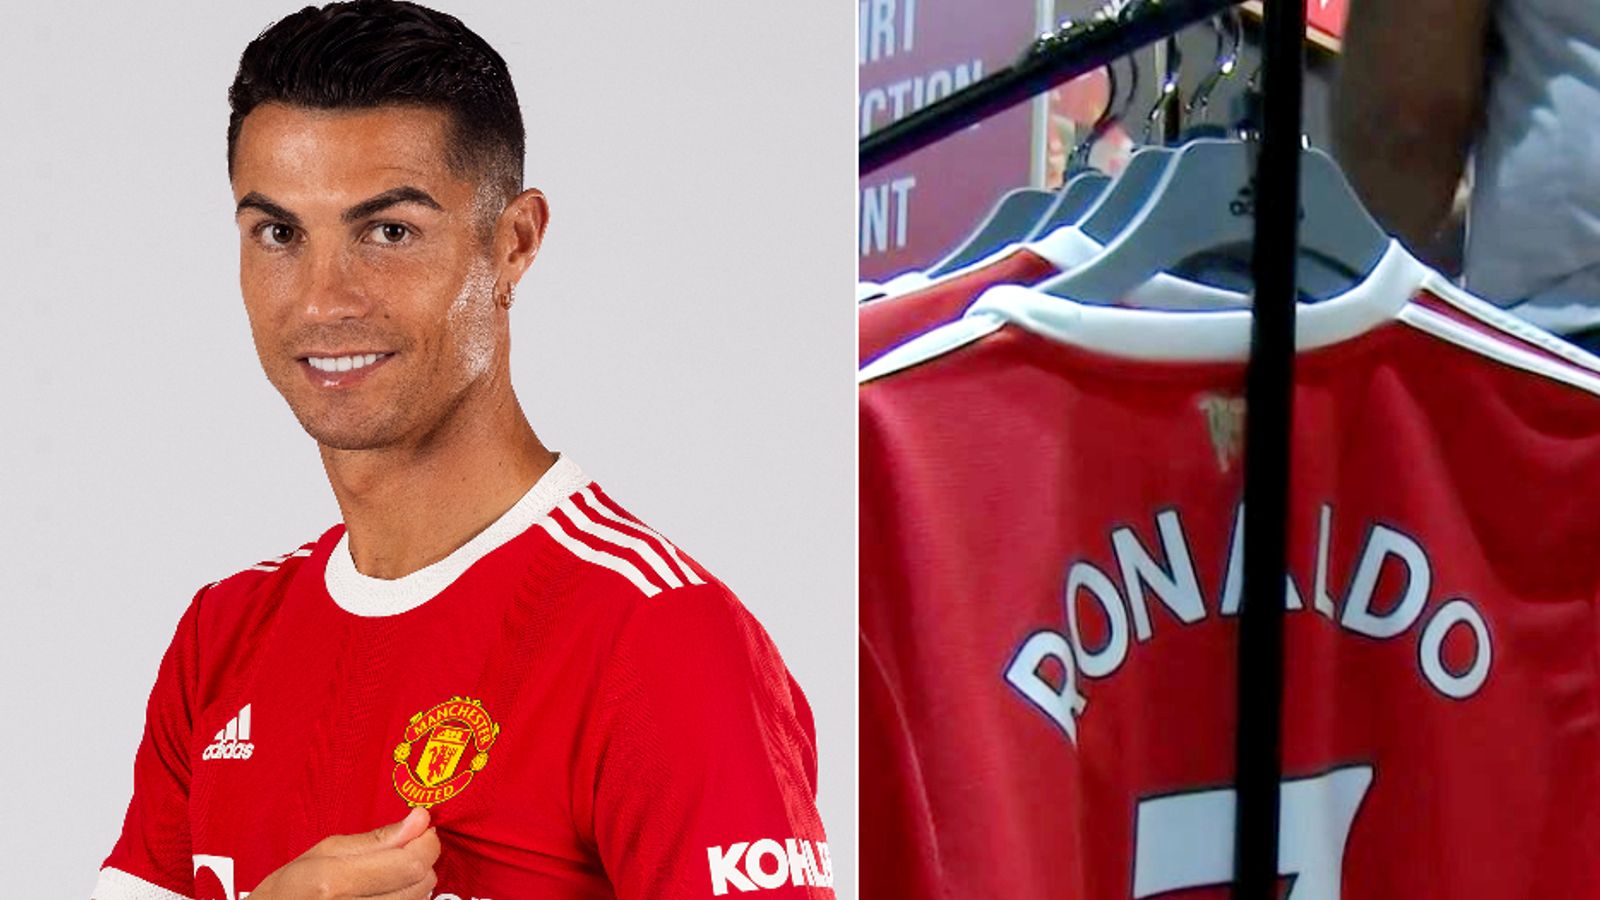 Cristiano Ronaldo smashes shirt sales records in hours after Man Utd squad  number was announced by club